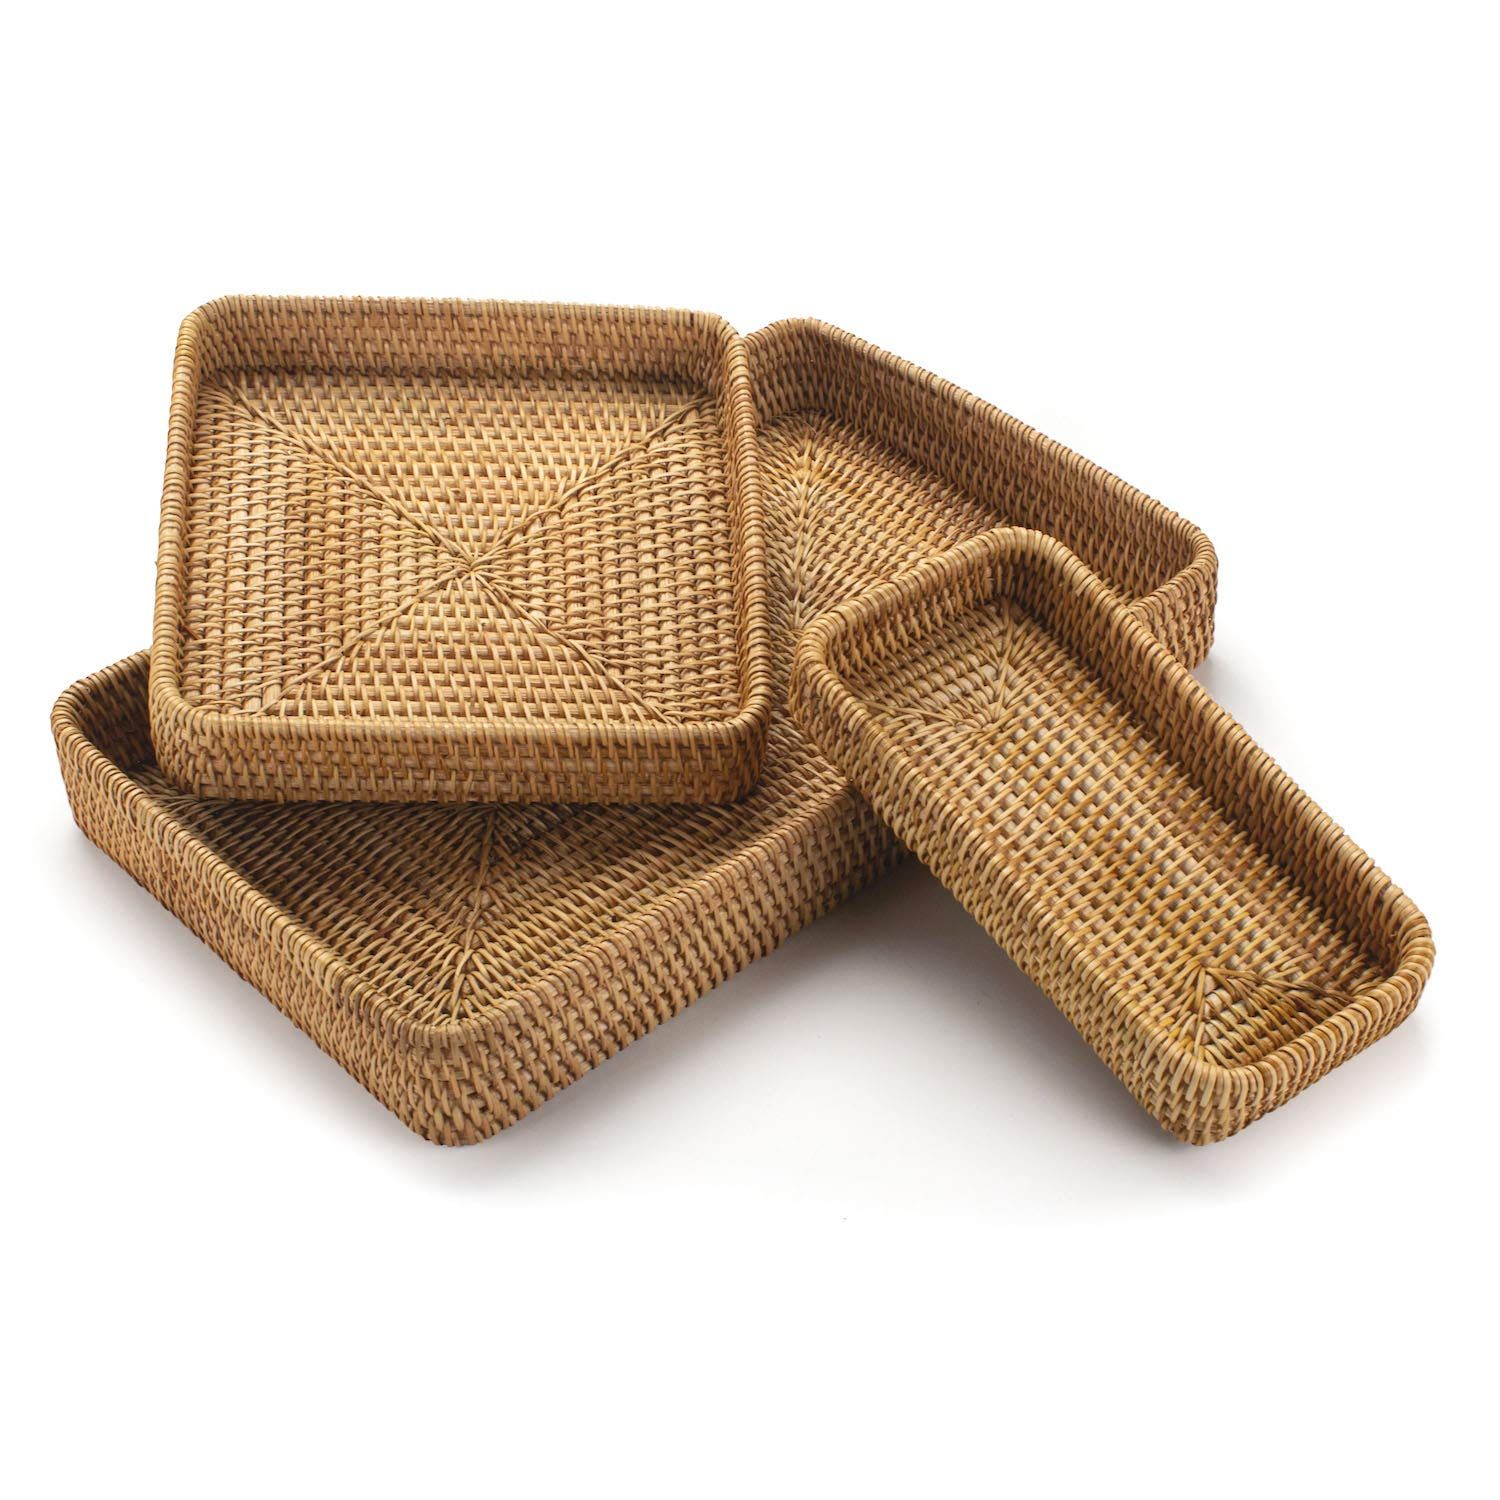 Rattan Serving Tray, Rectangular Woven Tray, Natural Wicker Decorative Serving Baskets for Organizing Tabletop Bathroom Kitchen Counter (Natural) | Amazon (US)